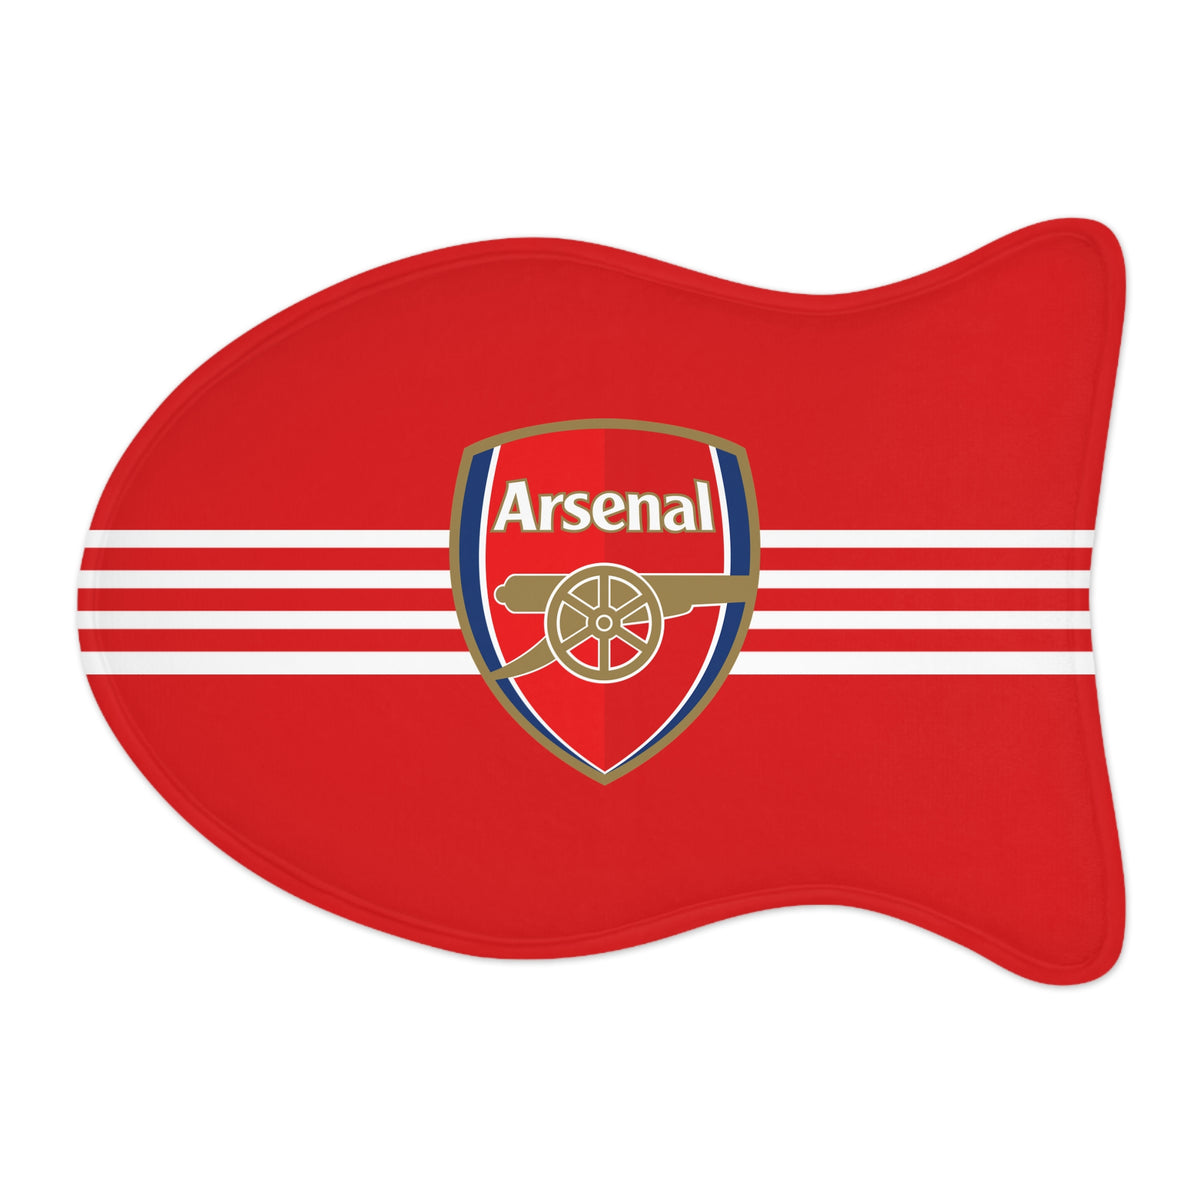 Arsenal FC 23 Home Inspired Fish-shaped Feeding Mats - 3 Red Rovers